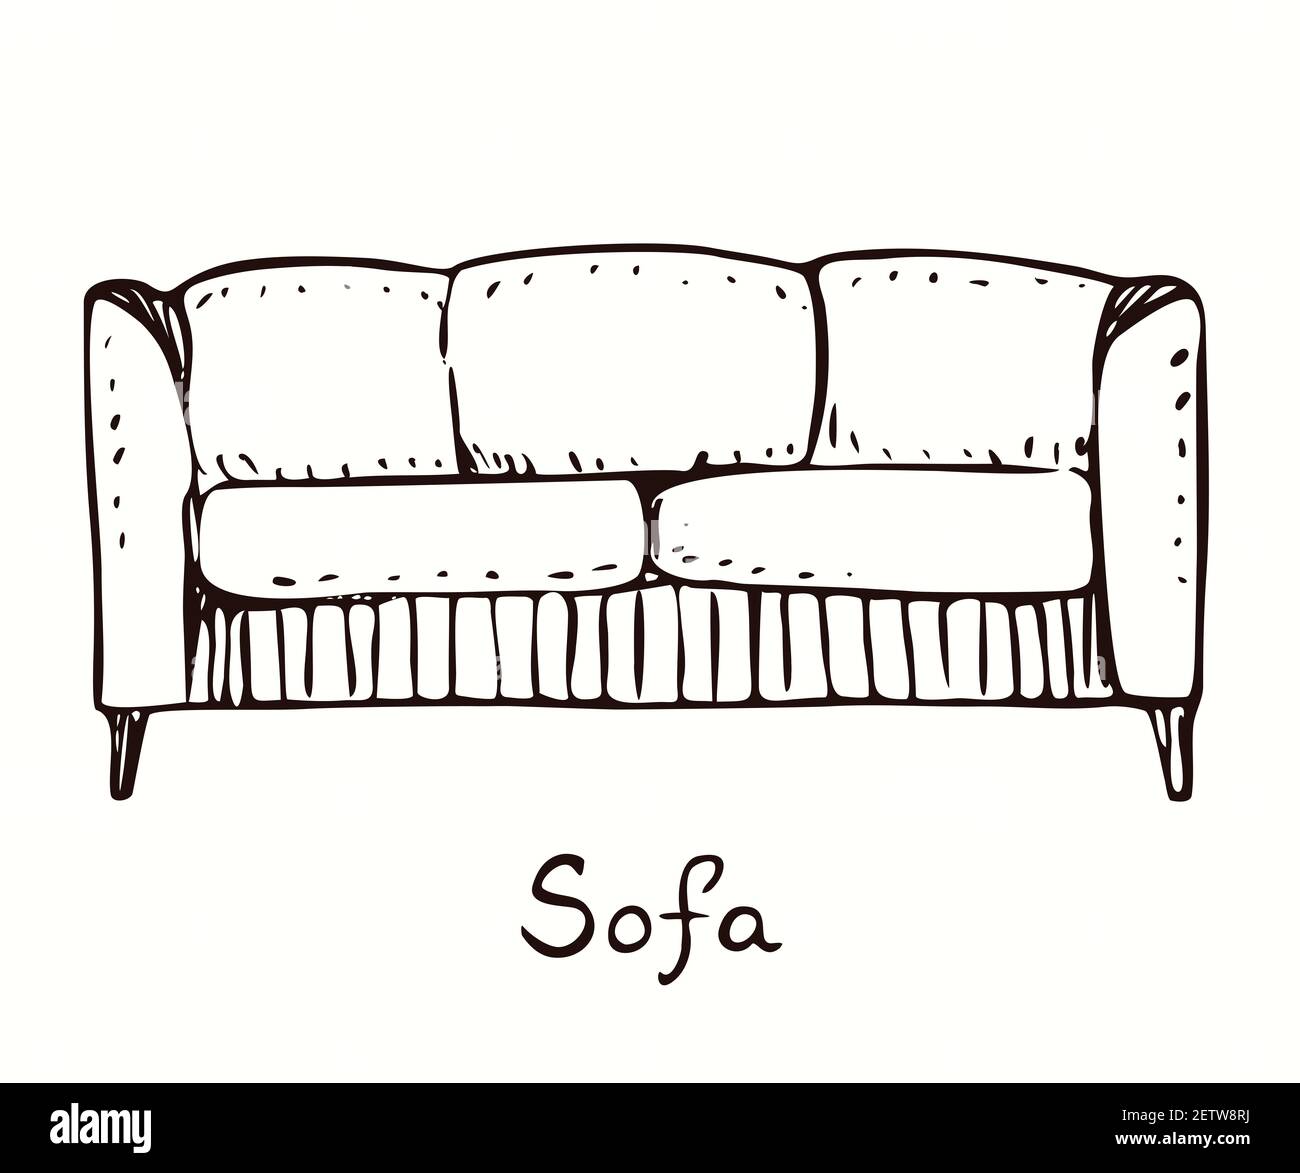 Sofa front view, hand drawn doodle, drawing in gravure style, sketch  illustration Stock Photo - Alamy